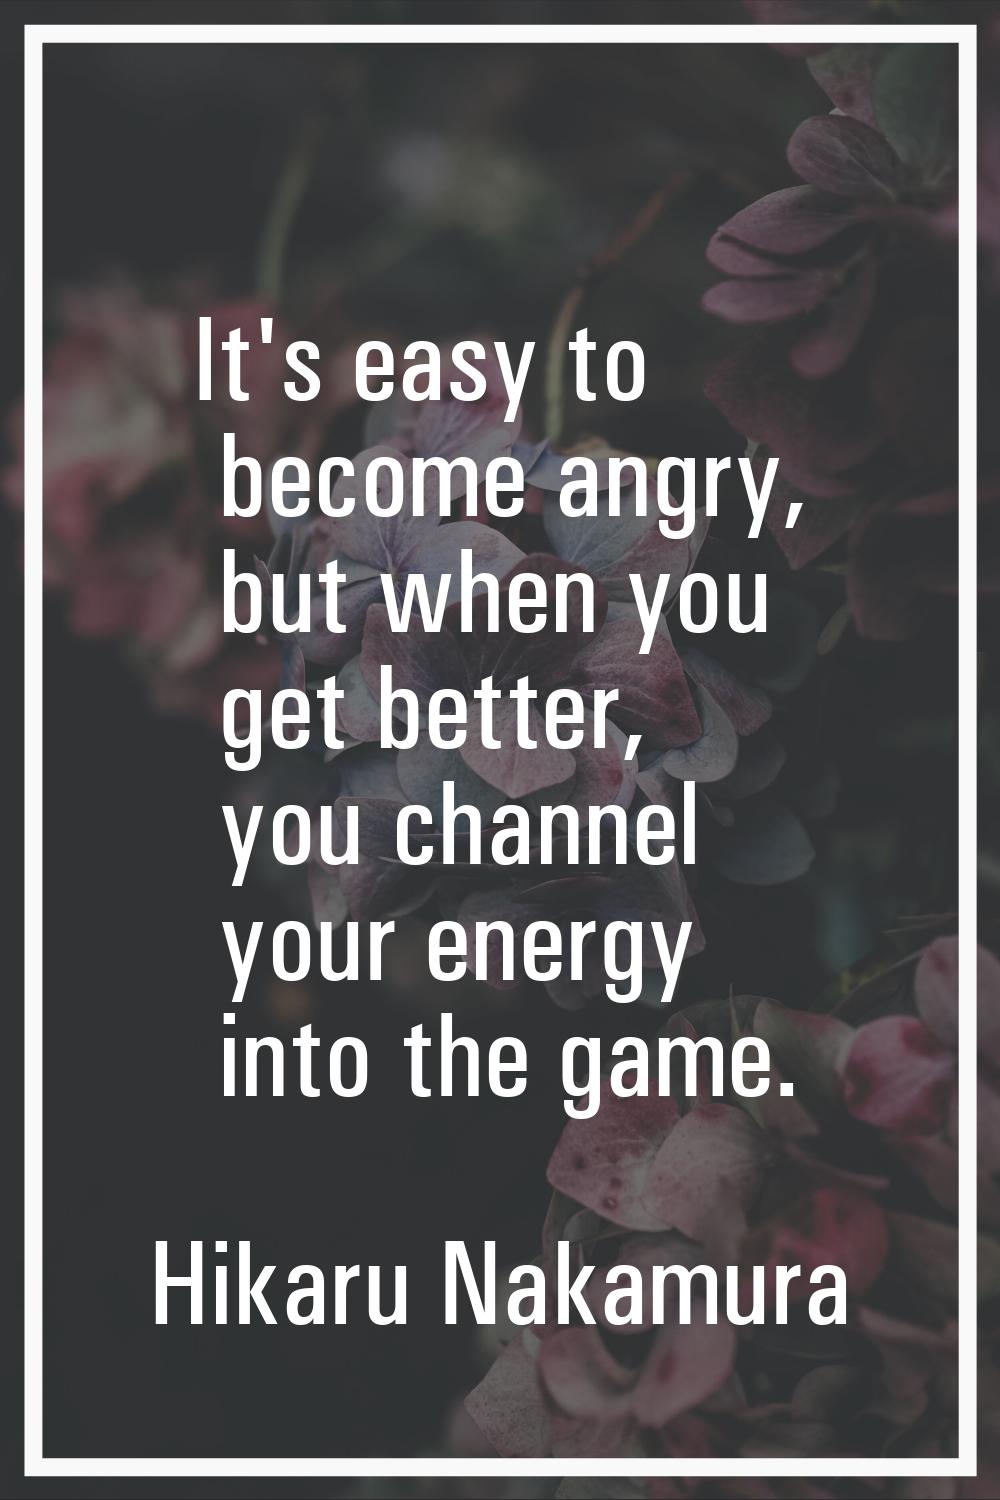 It's easy to become angry, but when you get better, you channel your energy into the game.